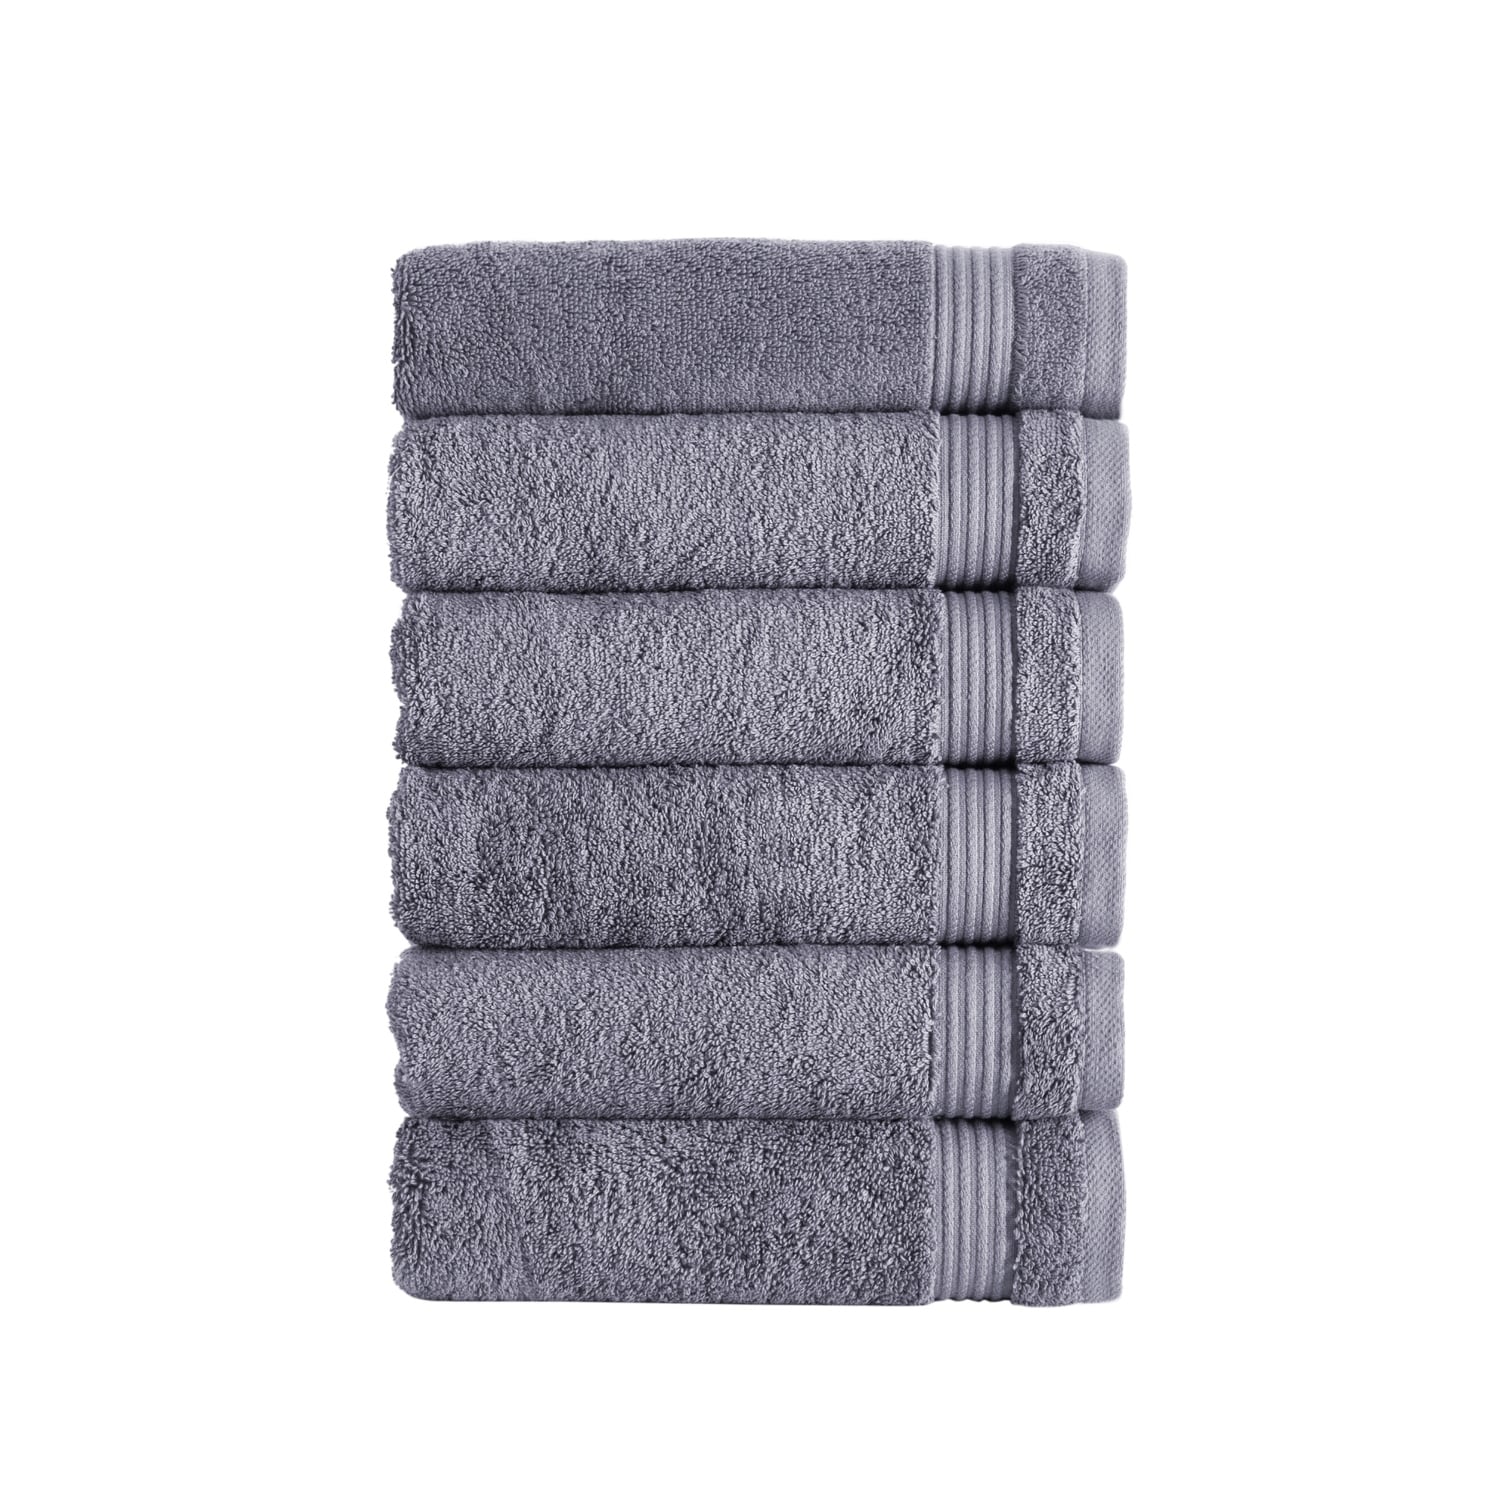 https://ak1.ostkcdn.com/images/products/is/images/direct/ce8e489d7a0e940fda54abcaa3b69938befff2e4/Classic-Turkish-Towels-Amadeus-Hand-Towel-16x27.jpg